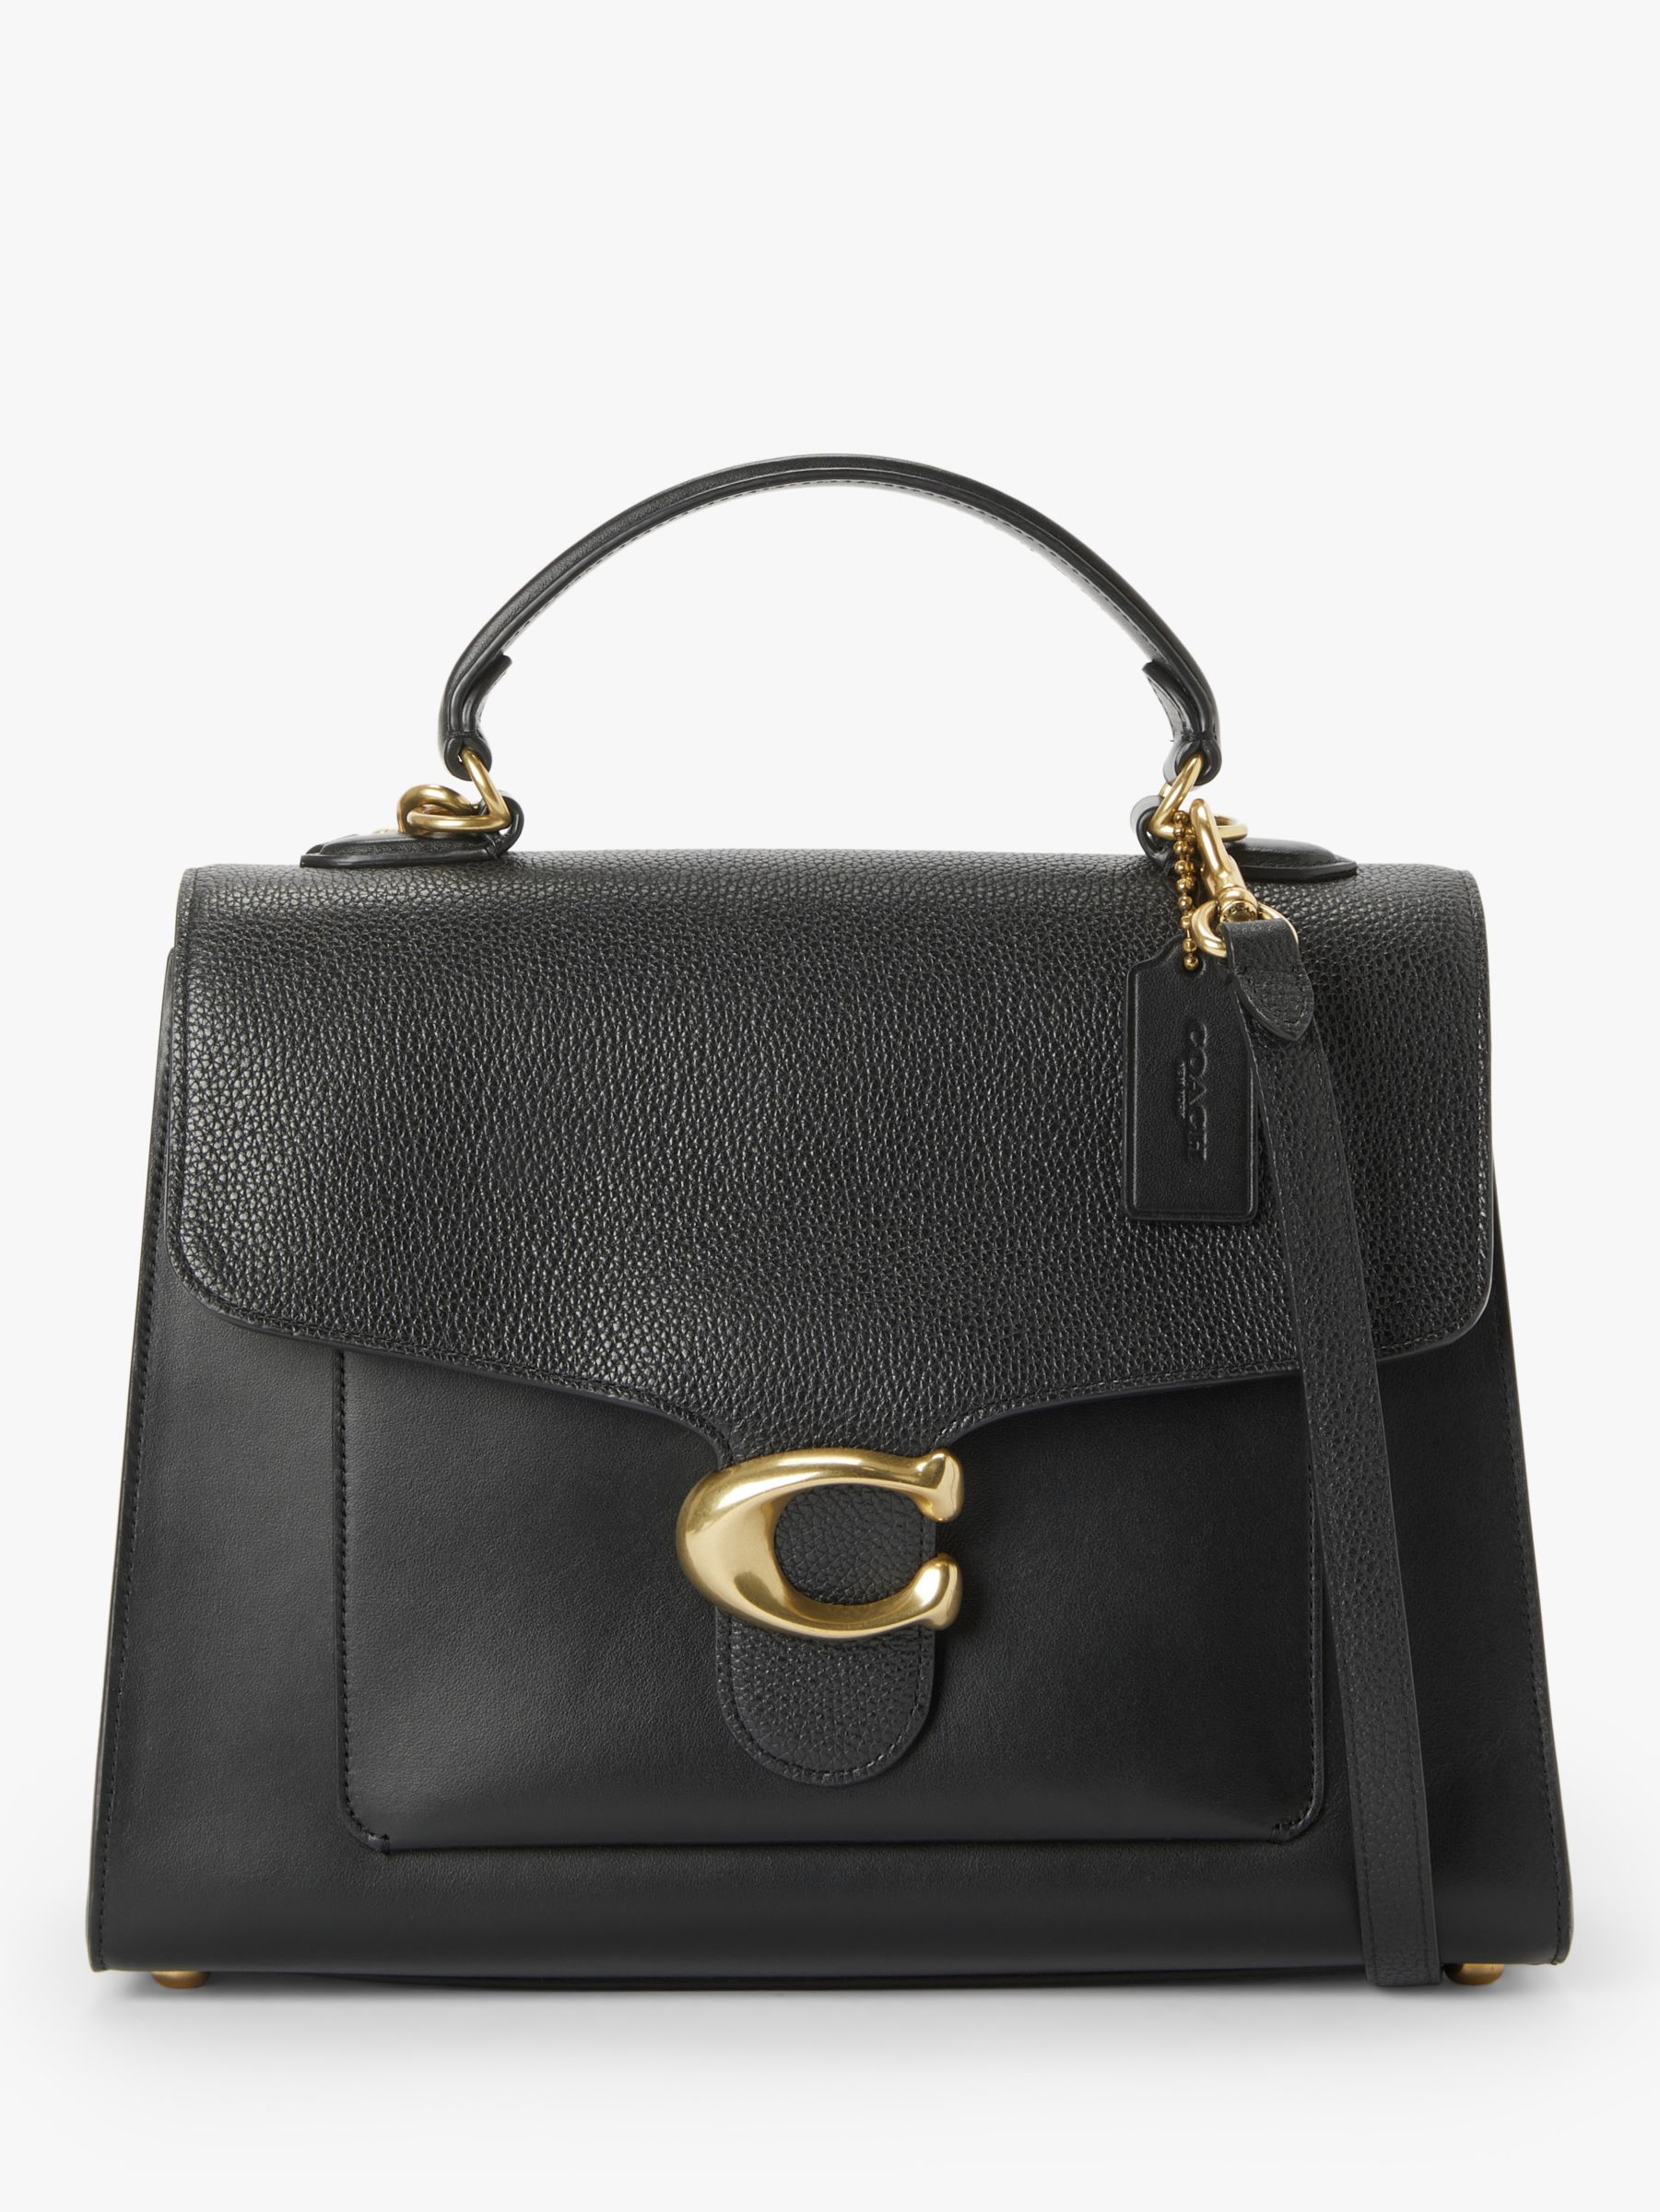 Coach Tabby Leather Top Handle Grab Bag at John Lewis & Partners